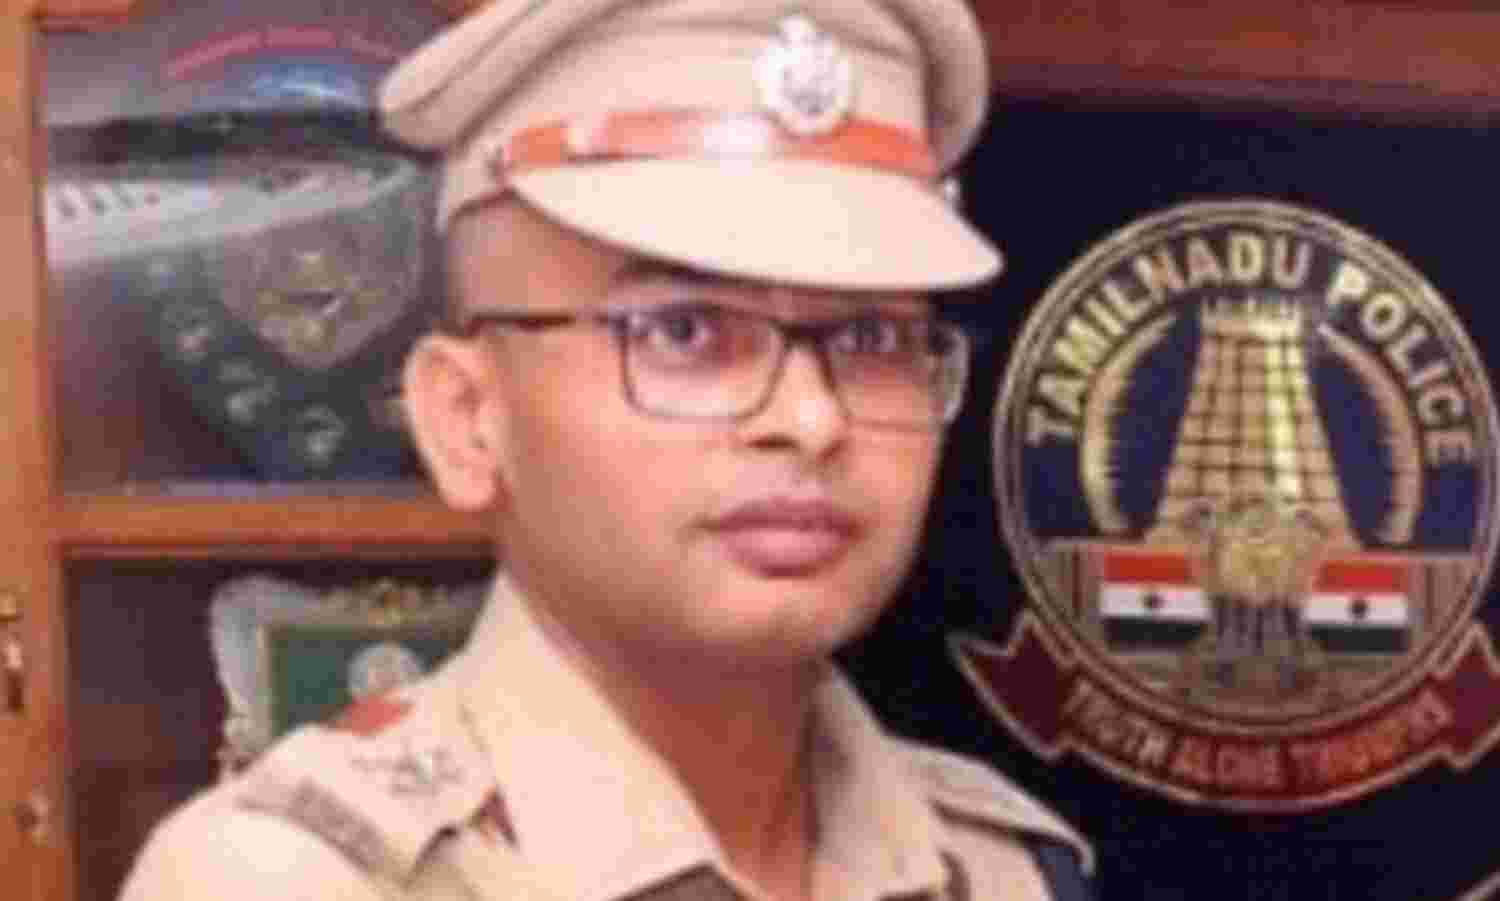 Facing allegation of torture, IPS officer placed on compulsory wait